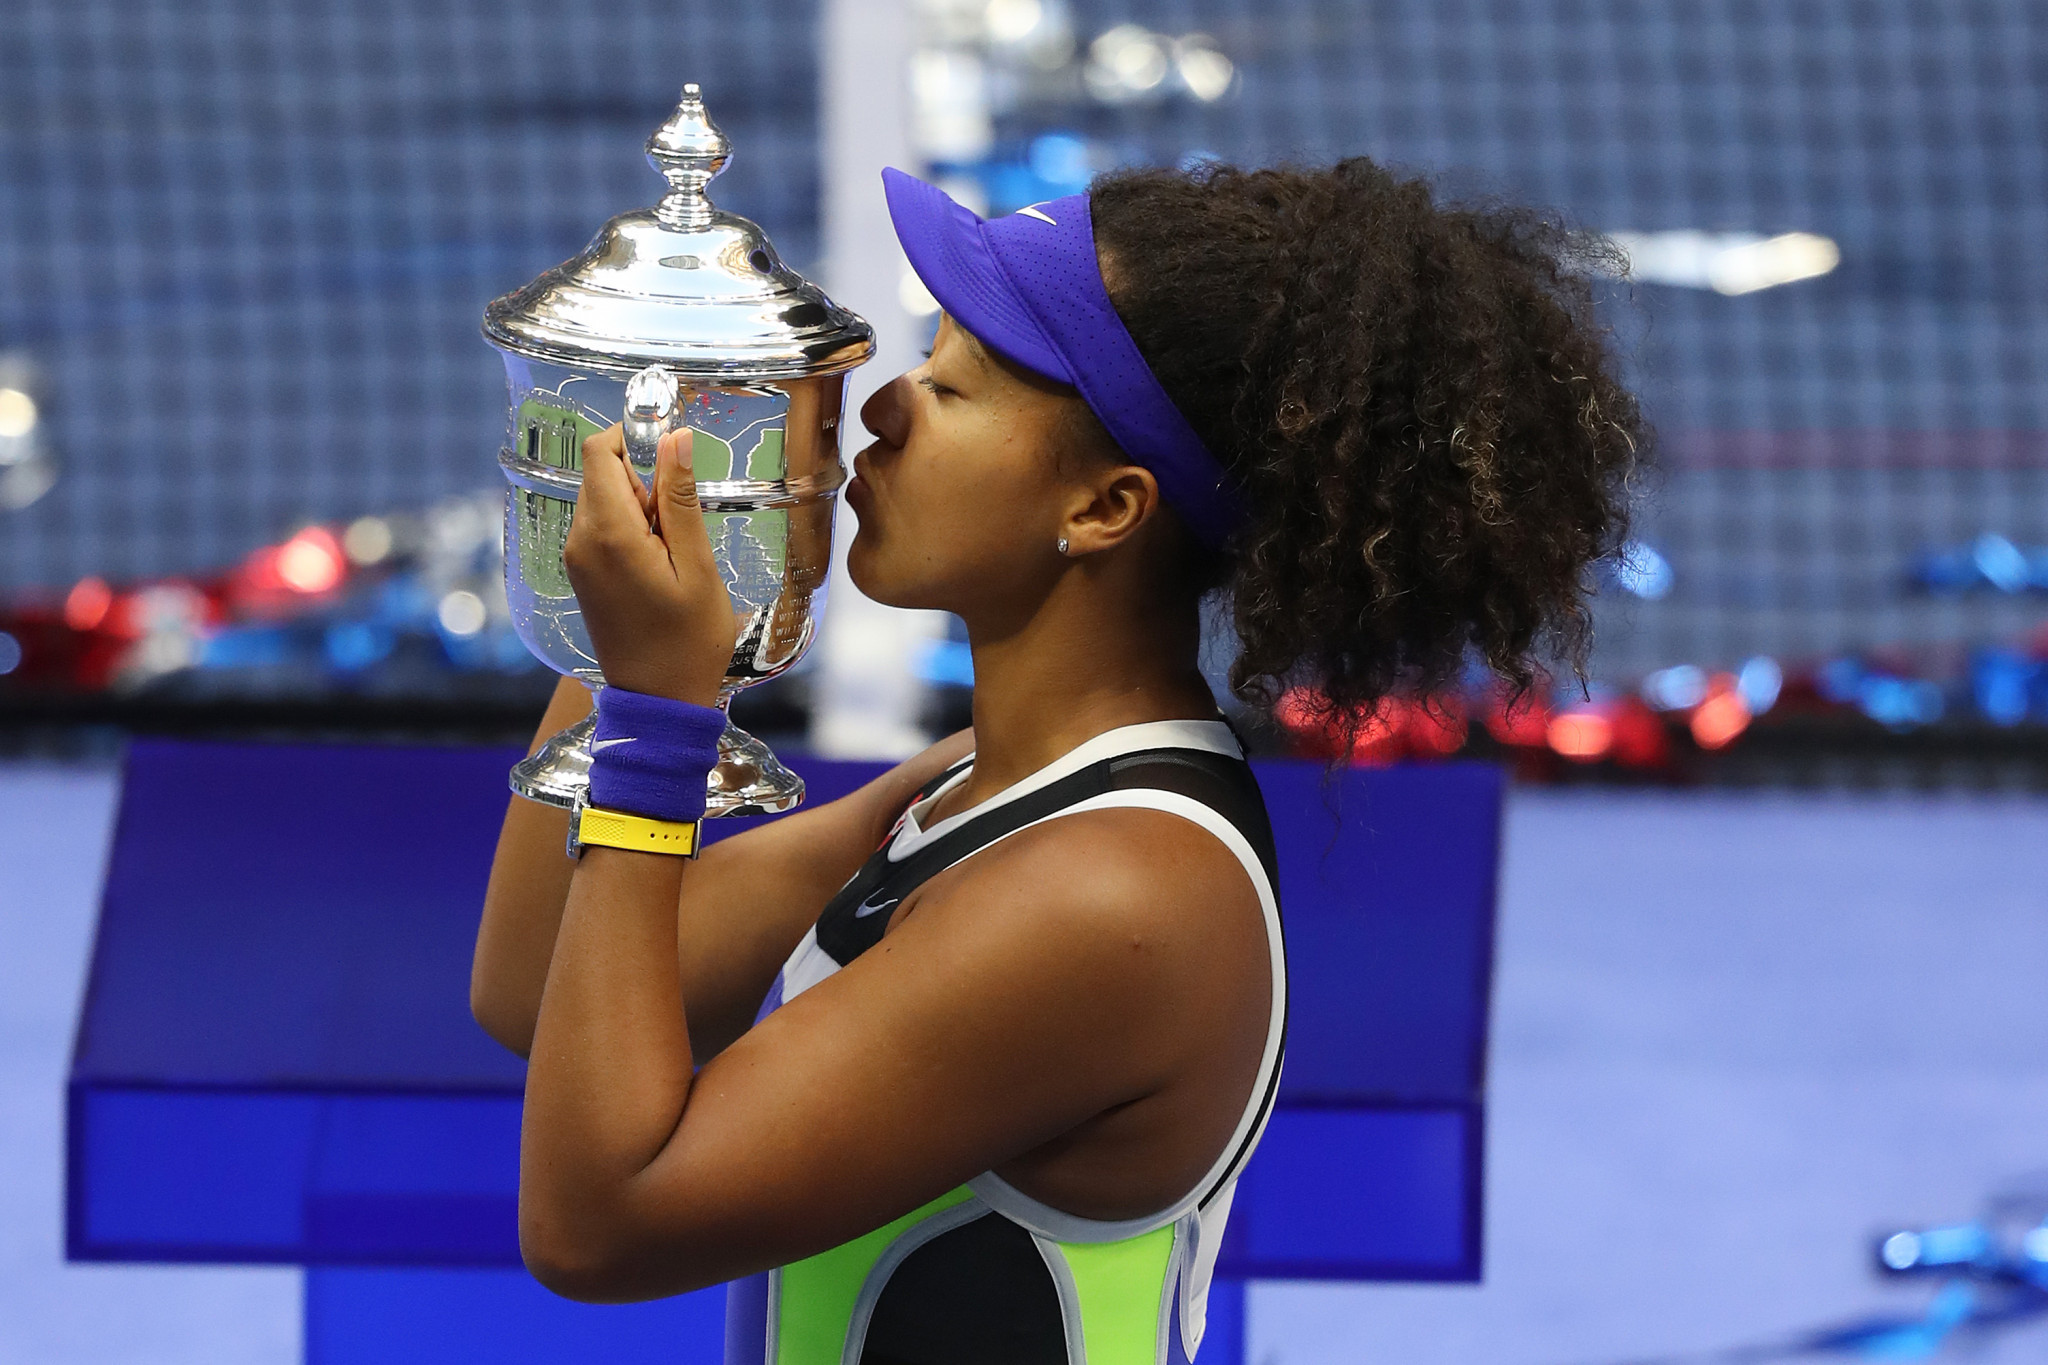 Naomi Osaka won a second US Open title in New York this year ©Getty Images